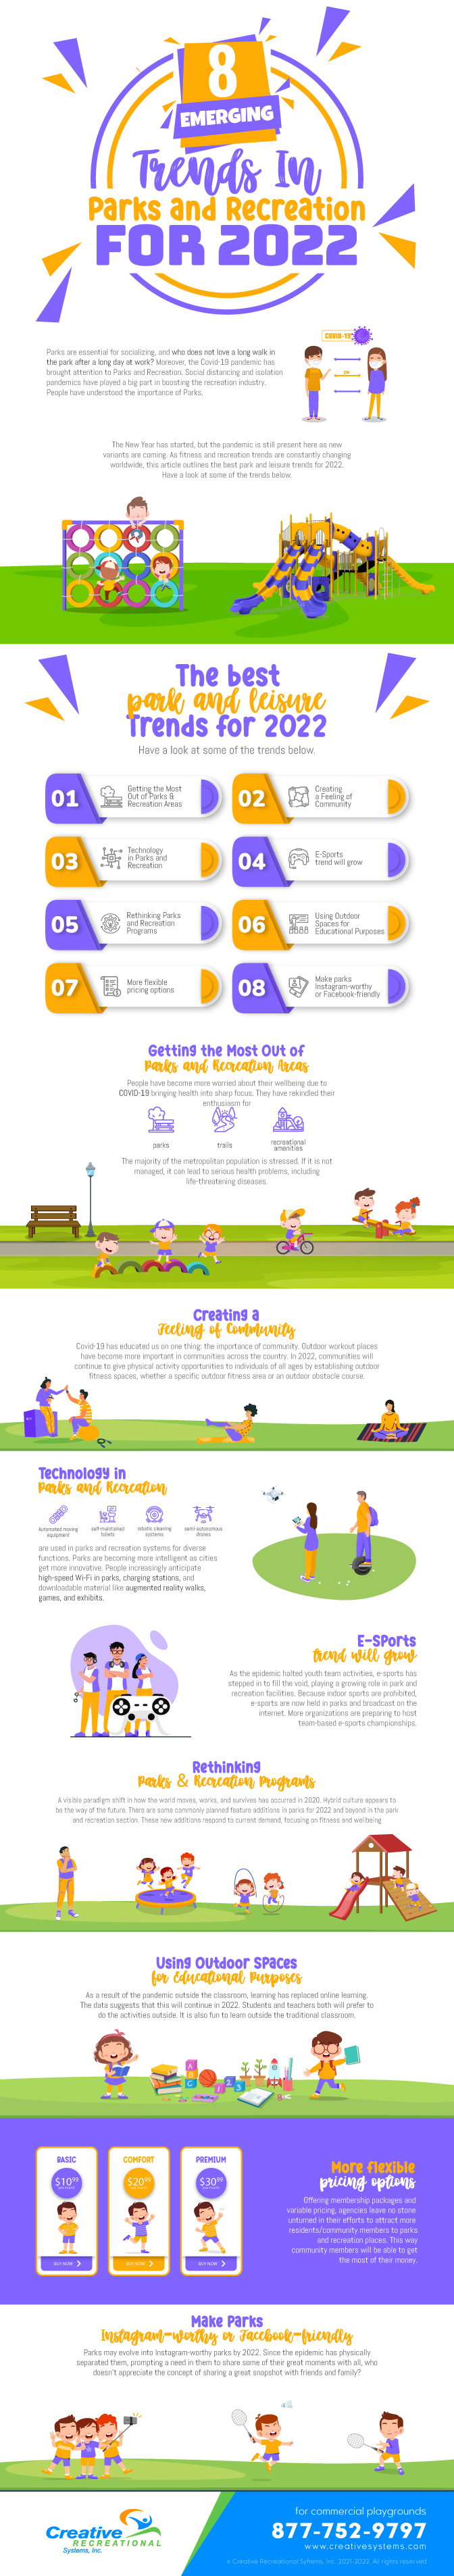 8_Emerging_Trends_In_Parks_and_Recreation_For_2022